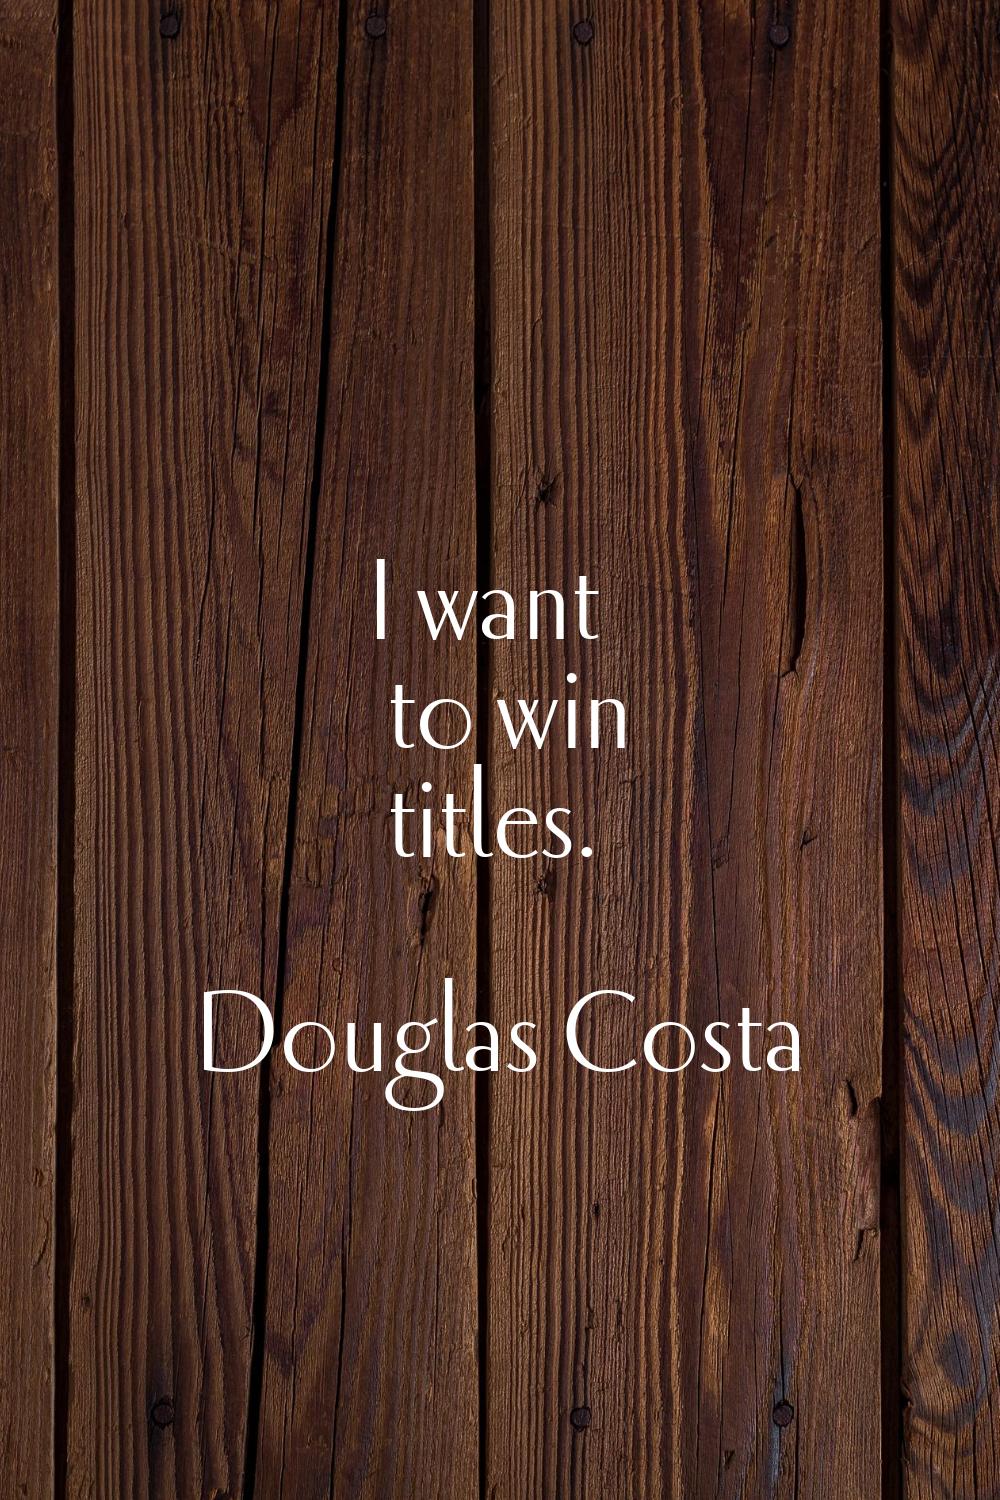 I want to win titles.